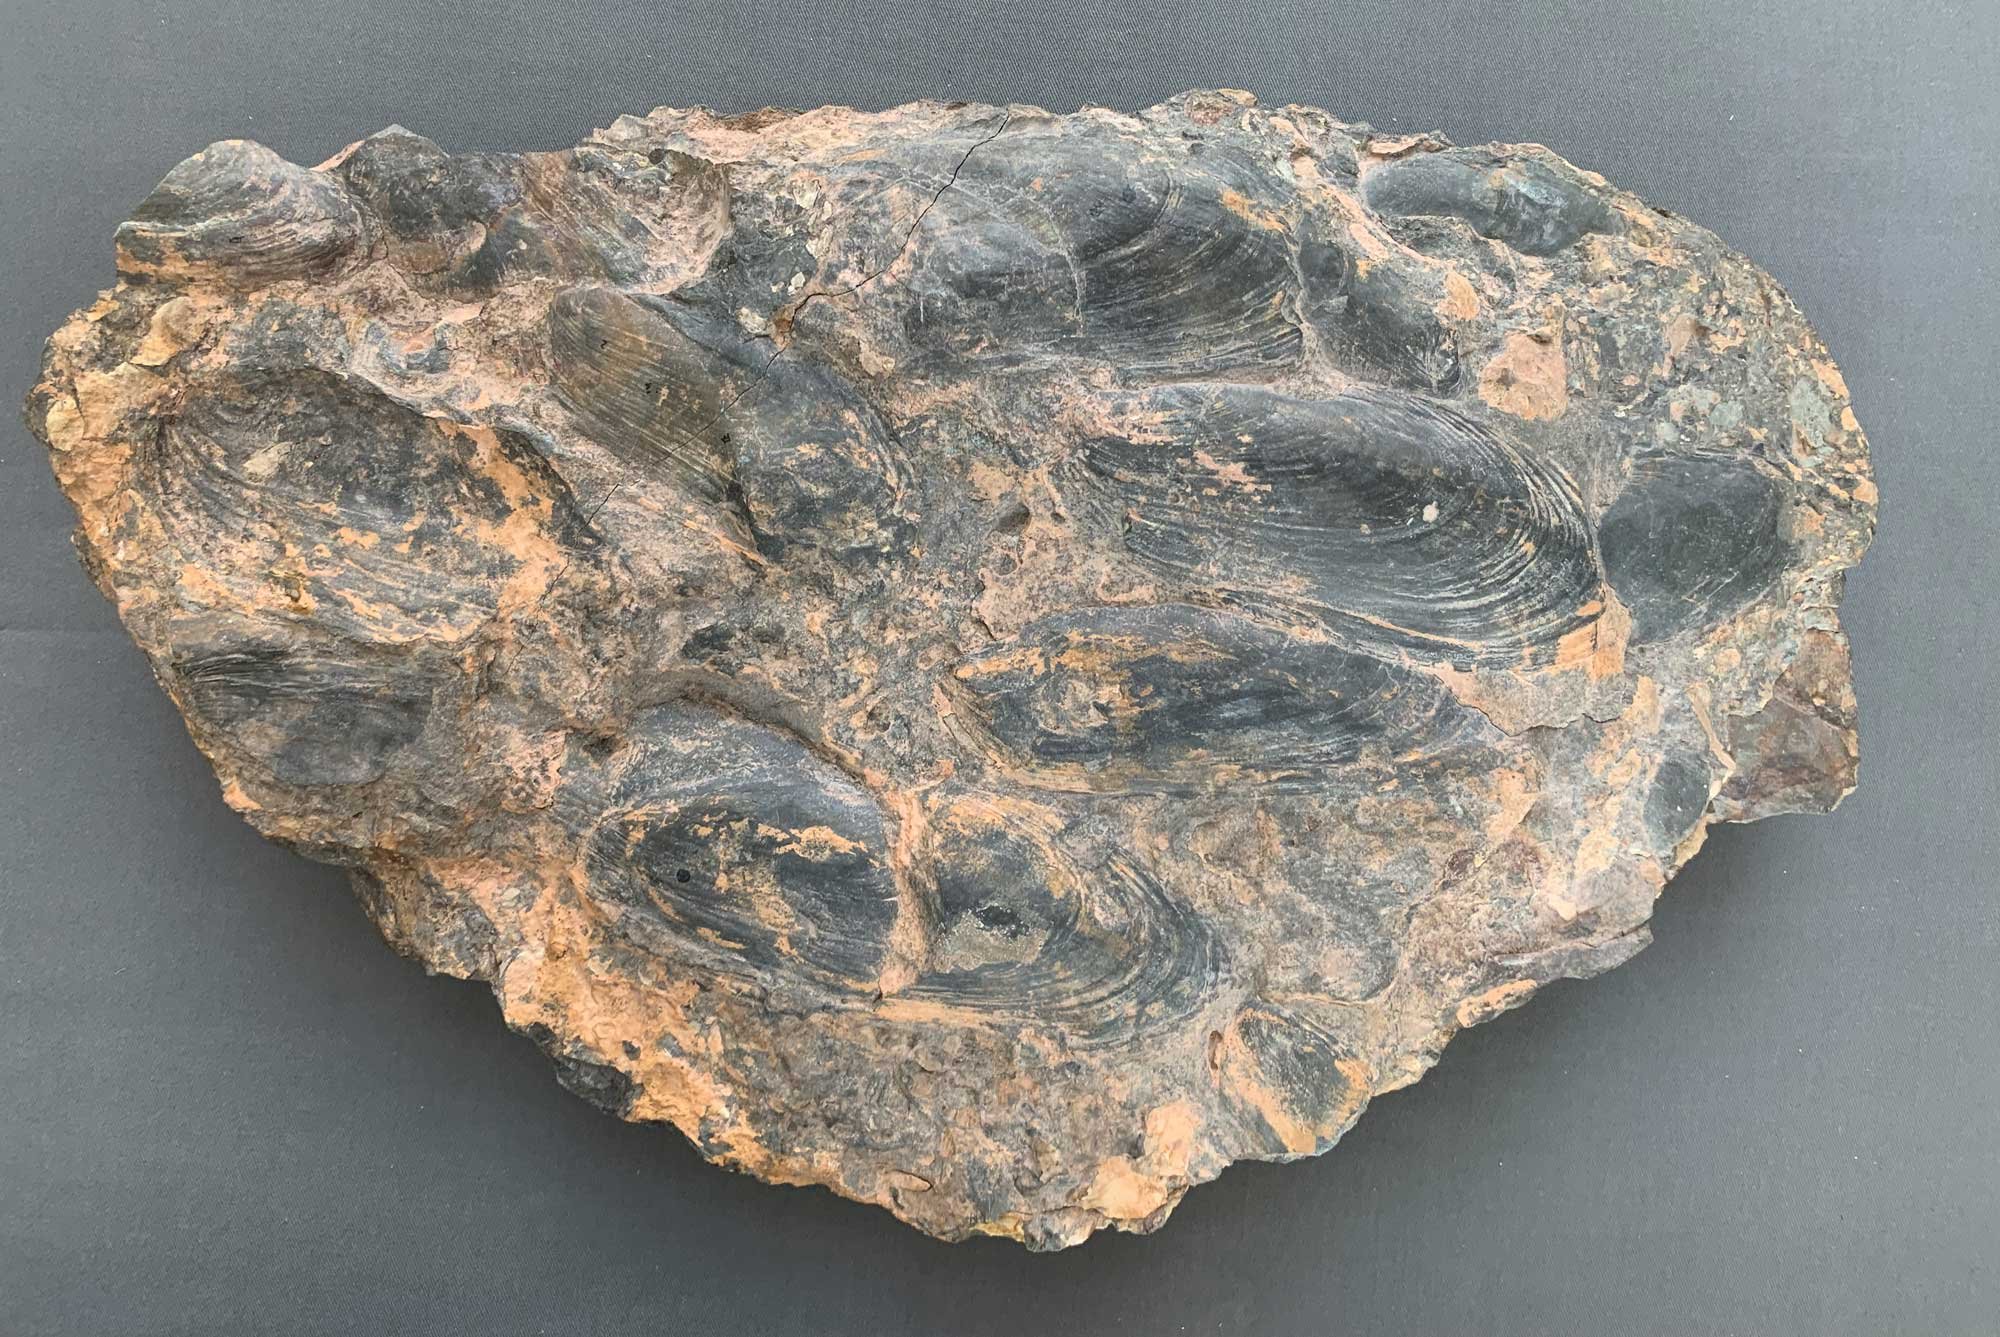 Photograph of Devonian freshwater bivalves from New York.